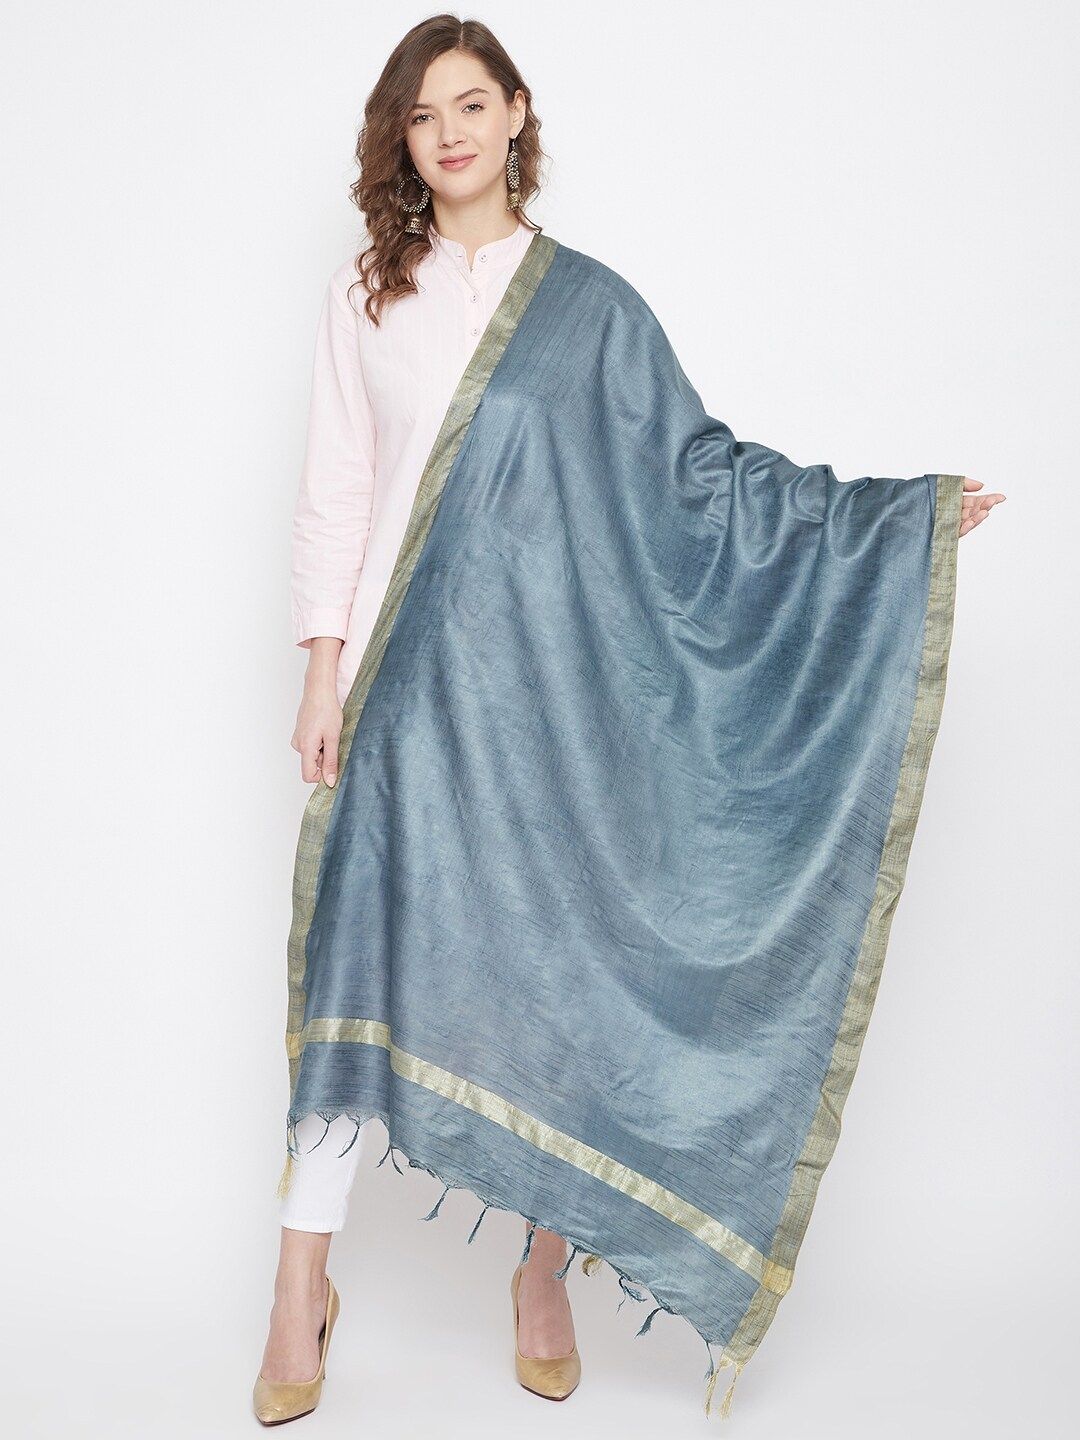 Clora Creation Grey & Gold-Toned Solid Cotton Tussar Dupatta Price in India